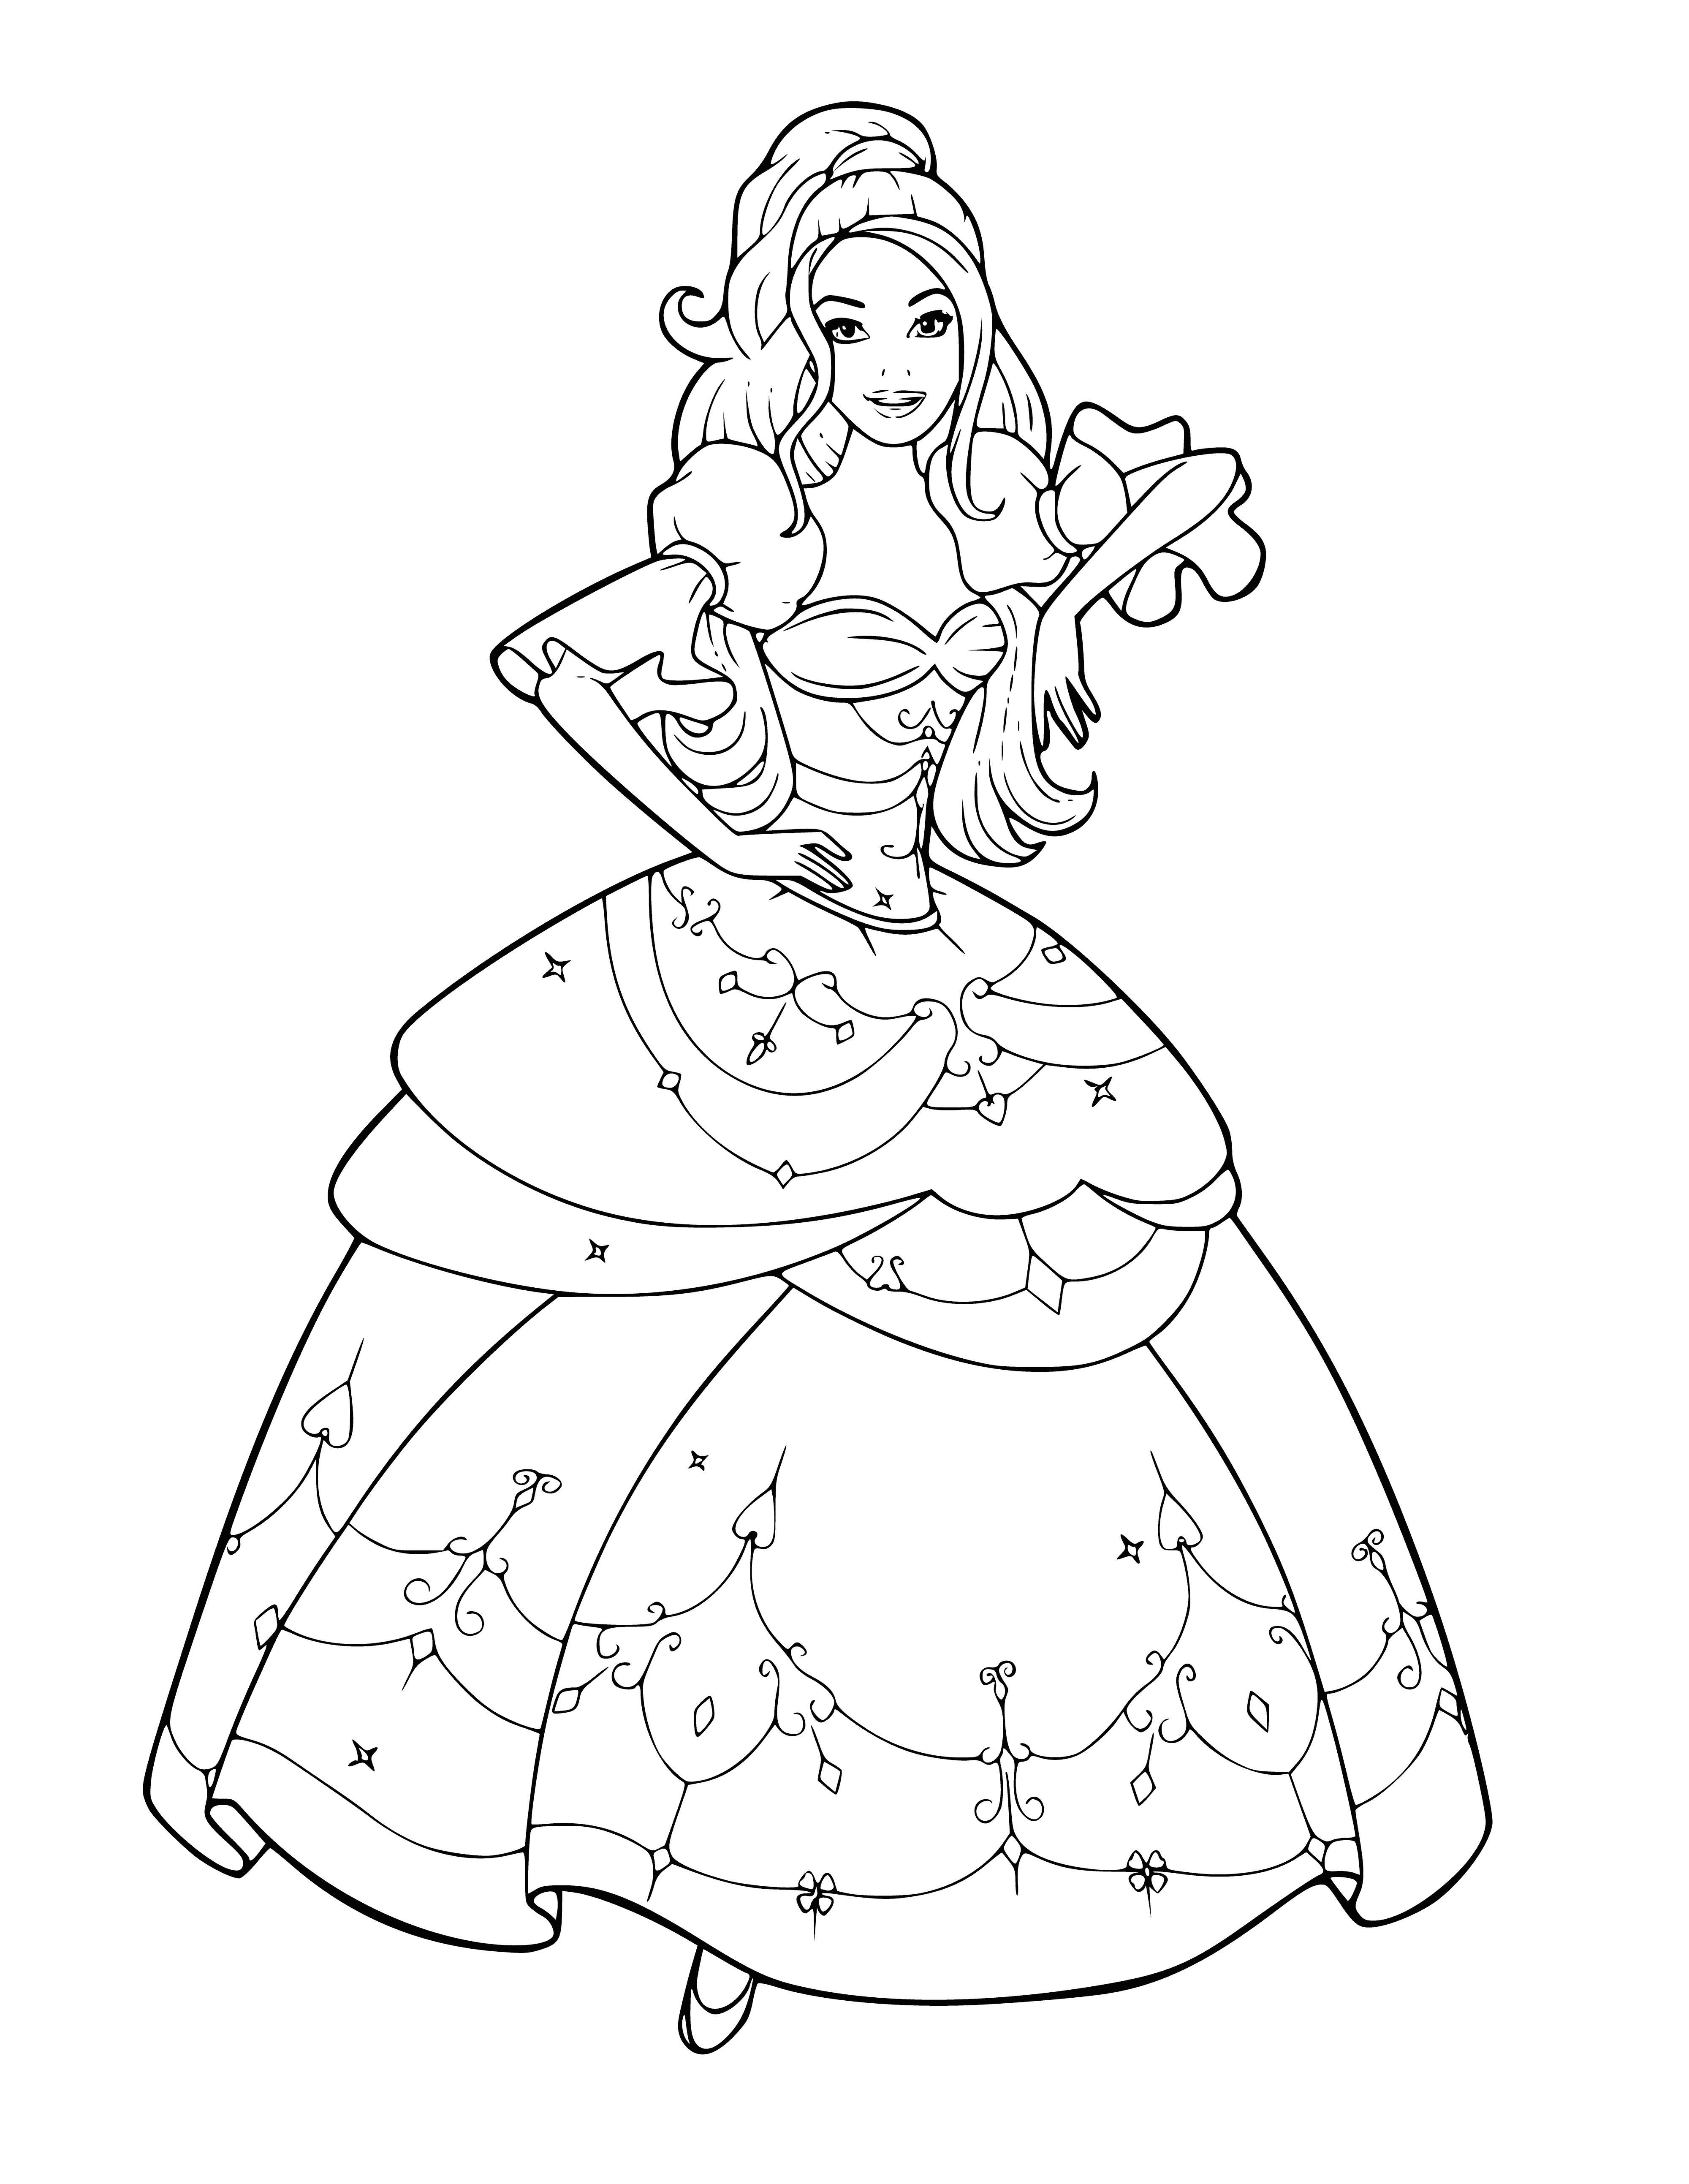 coloring page: Barbie in a pink ball gown with white undershirt, blonde hair in a bun, tiara and earrings. #Barbie #PinkBallGown